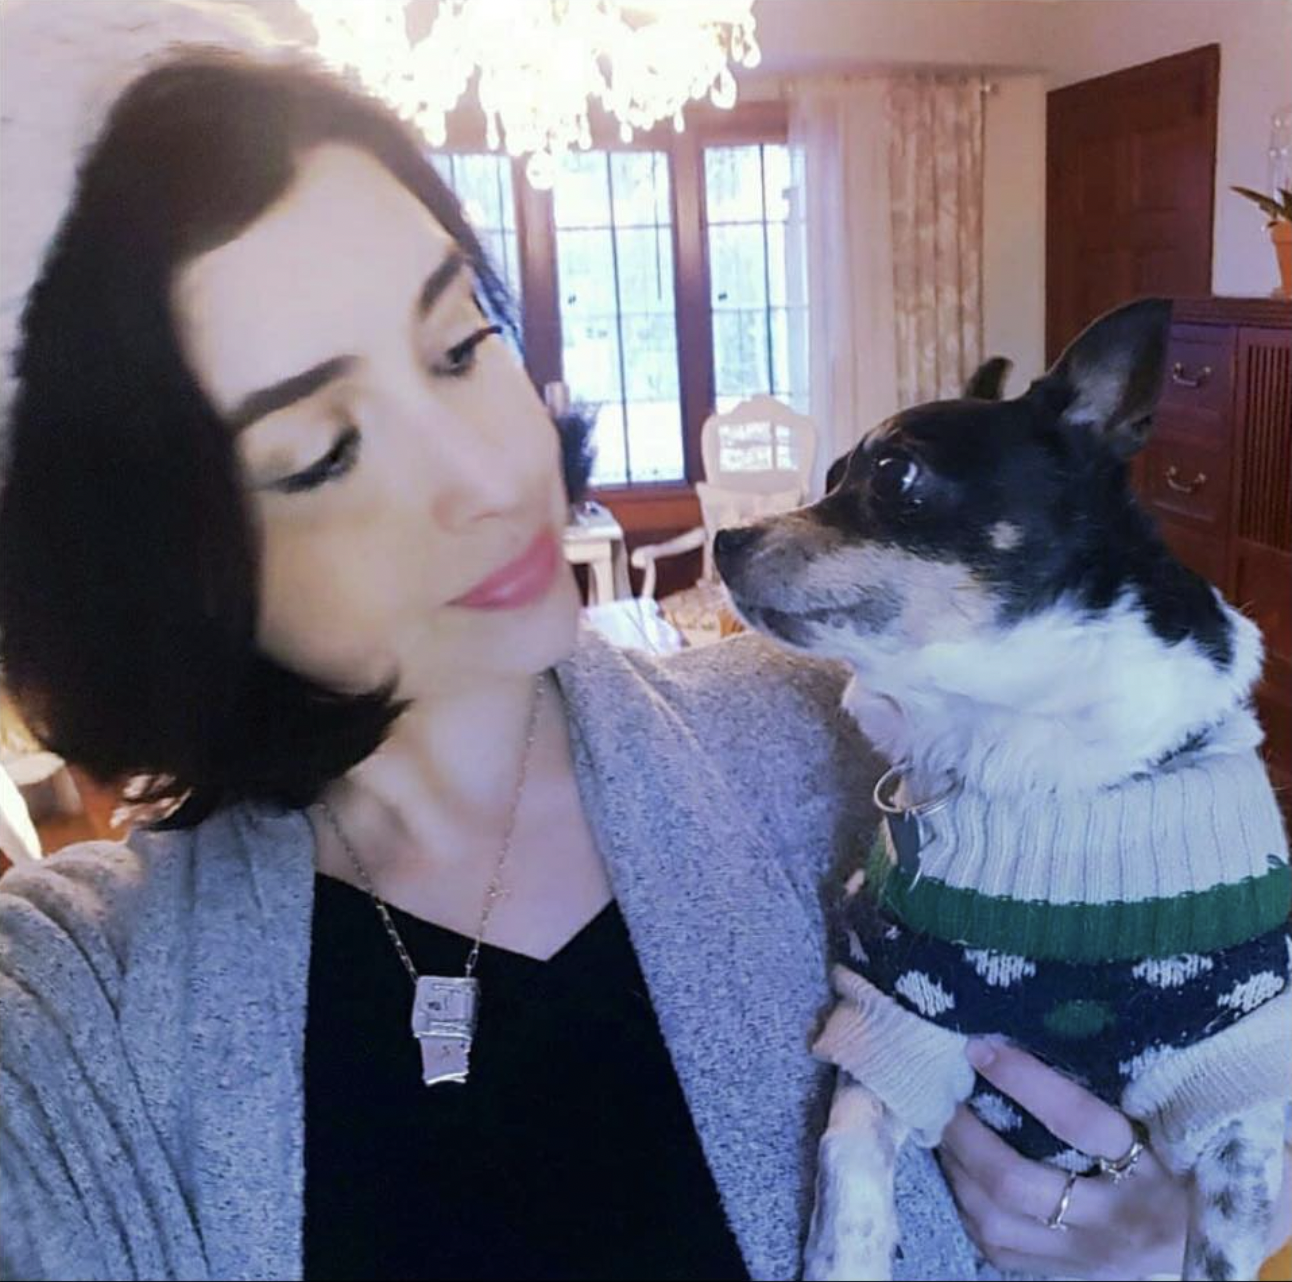 A woman with black hair looks at the dog she's carrying at right. She wears a gray sweater over a black shirt with a necklace; the dog, with a largely black-haired face and what seems to be a white-haired muzzle and body, is in a sweater of green, blue, and white.